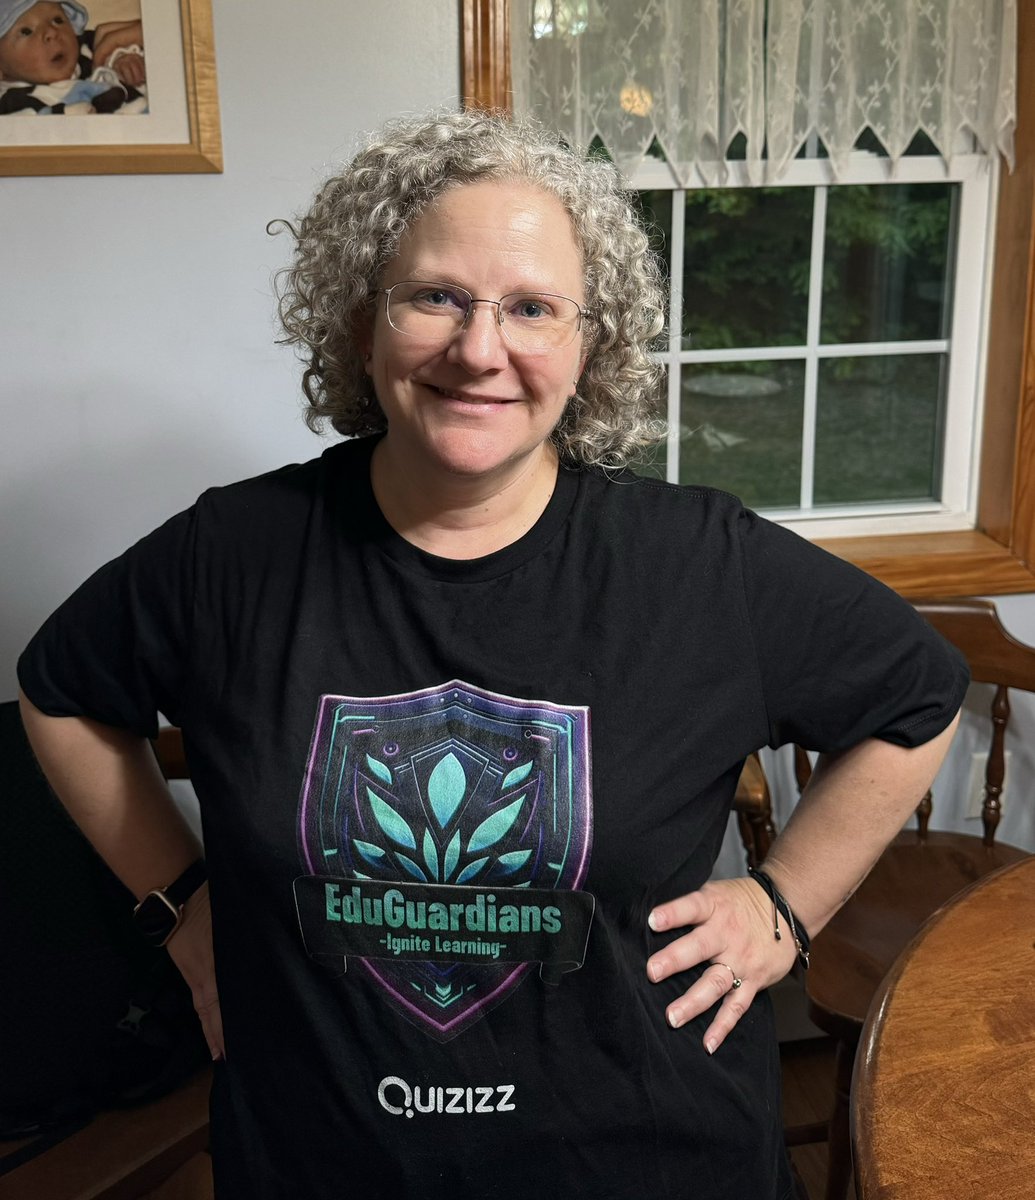 For this #EdTechtshirtTuesday, I wore my #EduGuardians official tshirt! @EduGuardian5